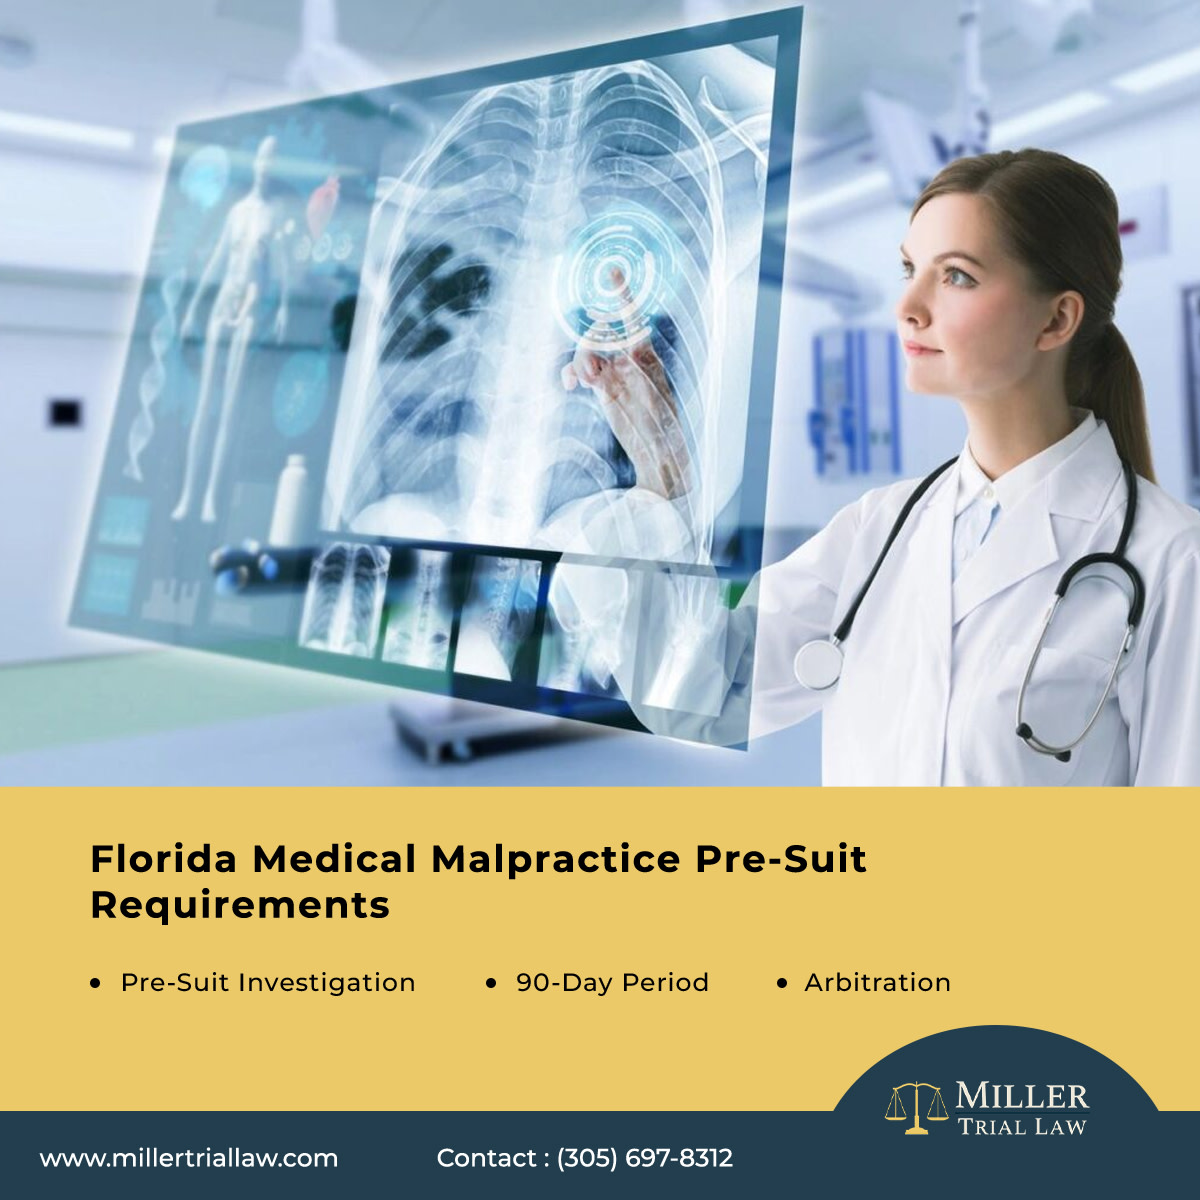 Florida Medical Malpractice Pre-Suit Requirements
VIEW TIPS... millertriallaw.com

#personalinjurylawyer #personalinjuryattorney #piattorney #pilawyer #miami #fortlauderdale #browardcounty #miamidadecounty#miamilawyer #miamiattorney